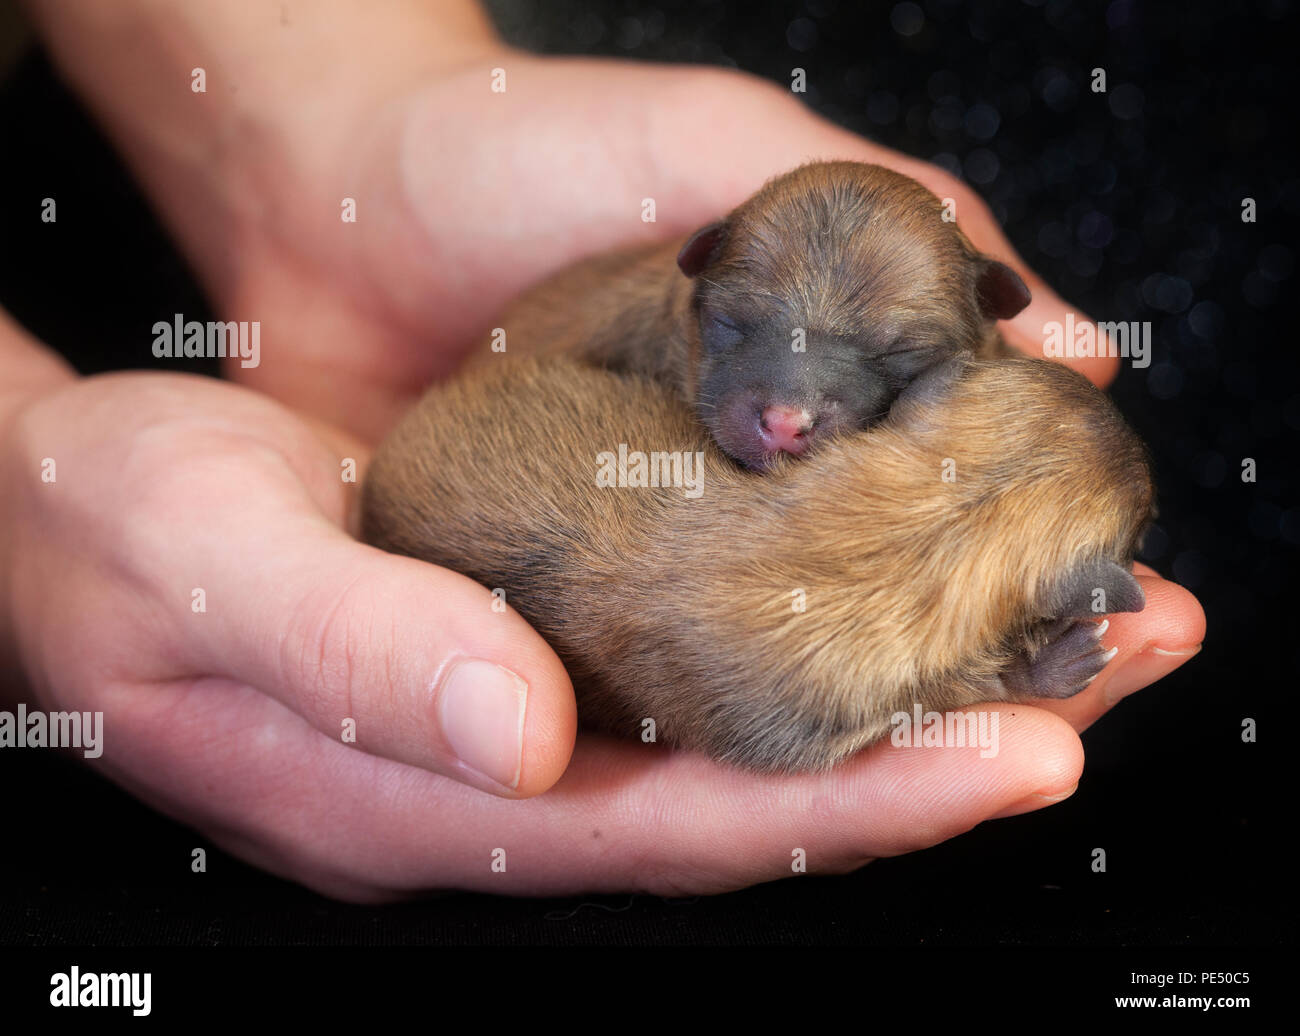 Newborn of couple of Pomeranian puppy dog in the hands Stock Photo